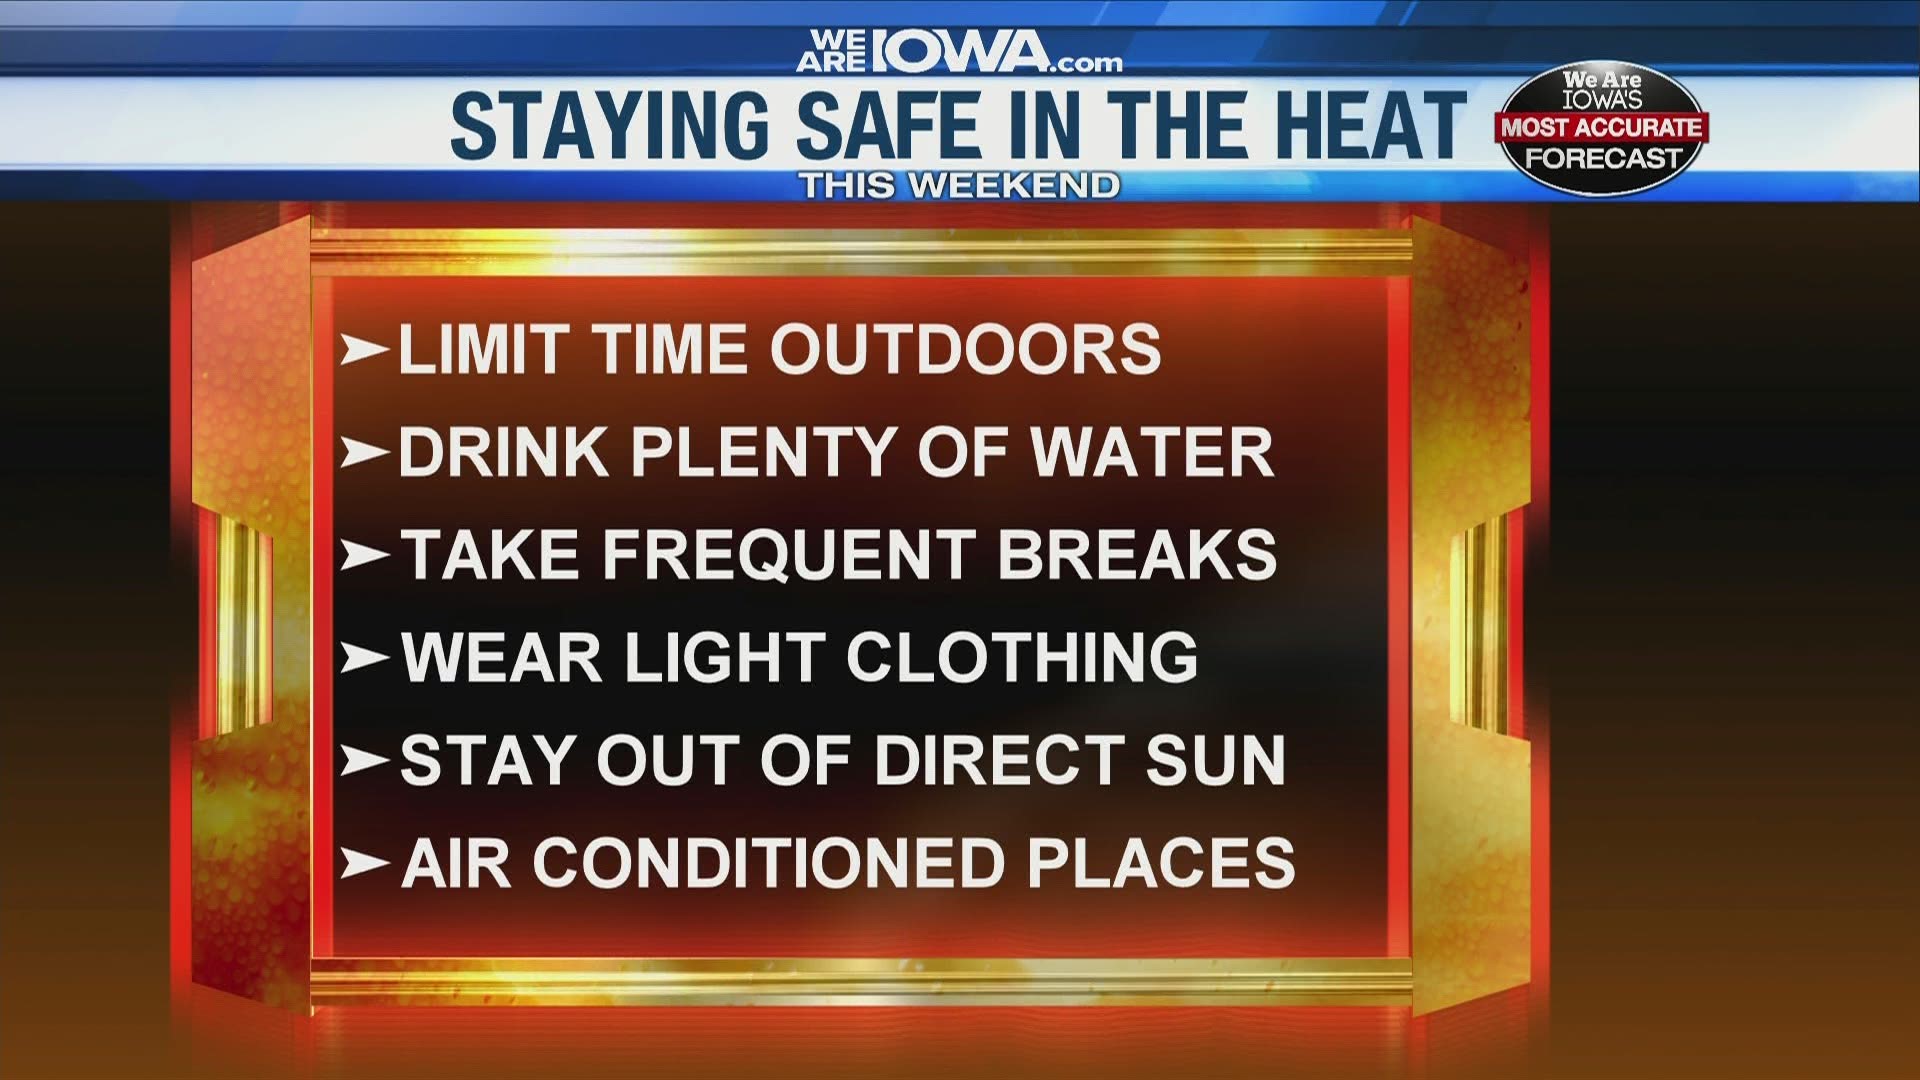 The heat index is forecasted to be well over 100 degrees this weekend. Here's how you can stay safe.